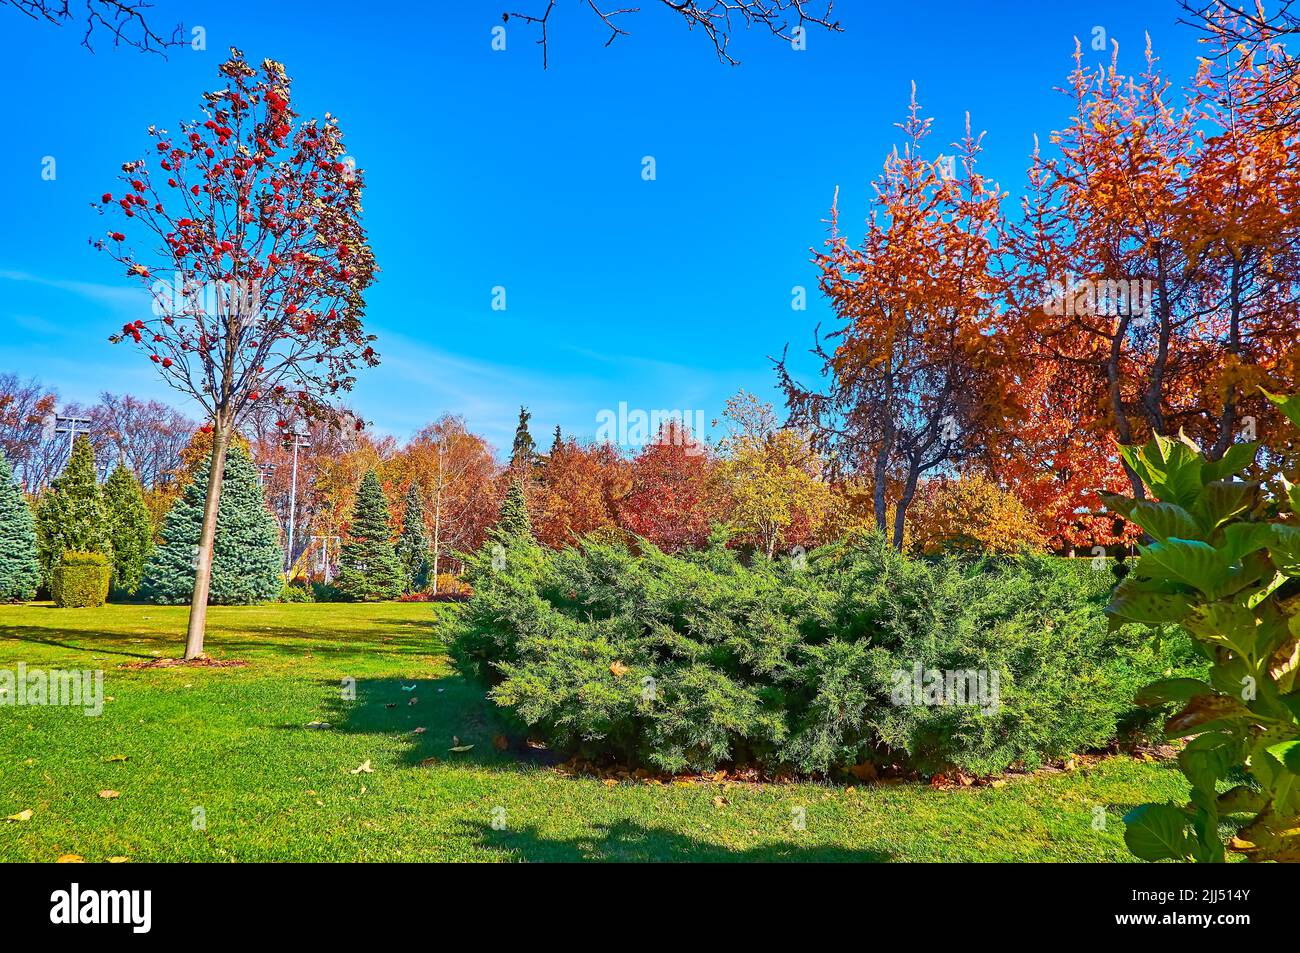 The bright colors of autumn nature in ornamental park with bright green lawn and juniper bushes, yellow larches and birches, red berries on whitebeam Stock Photo